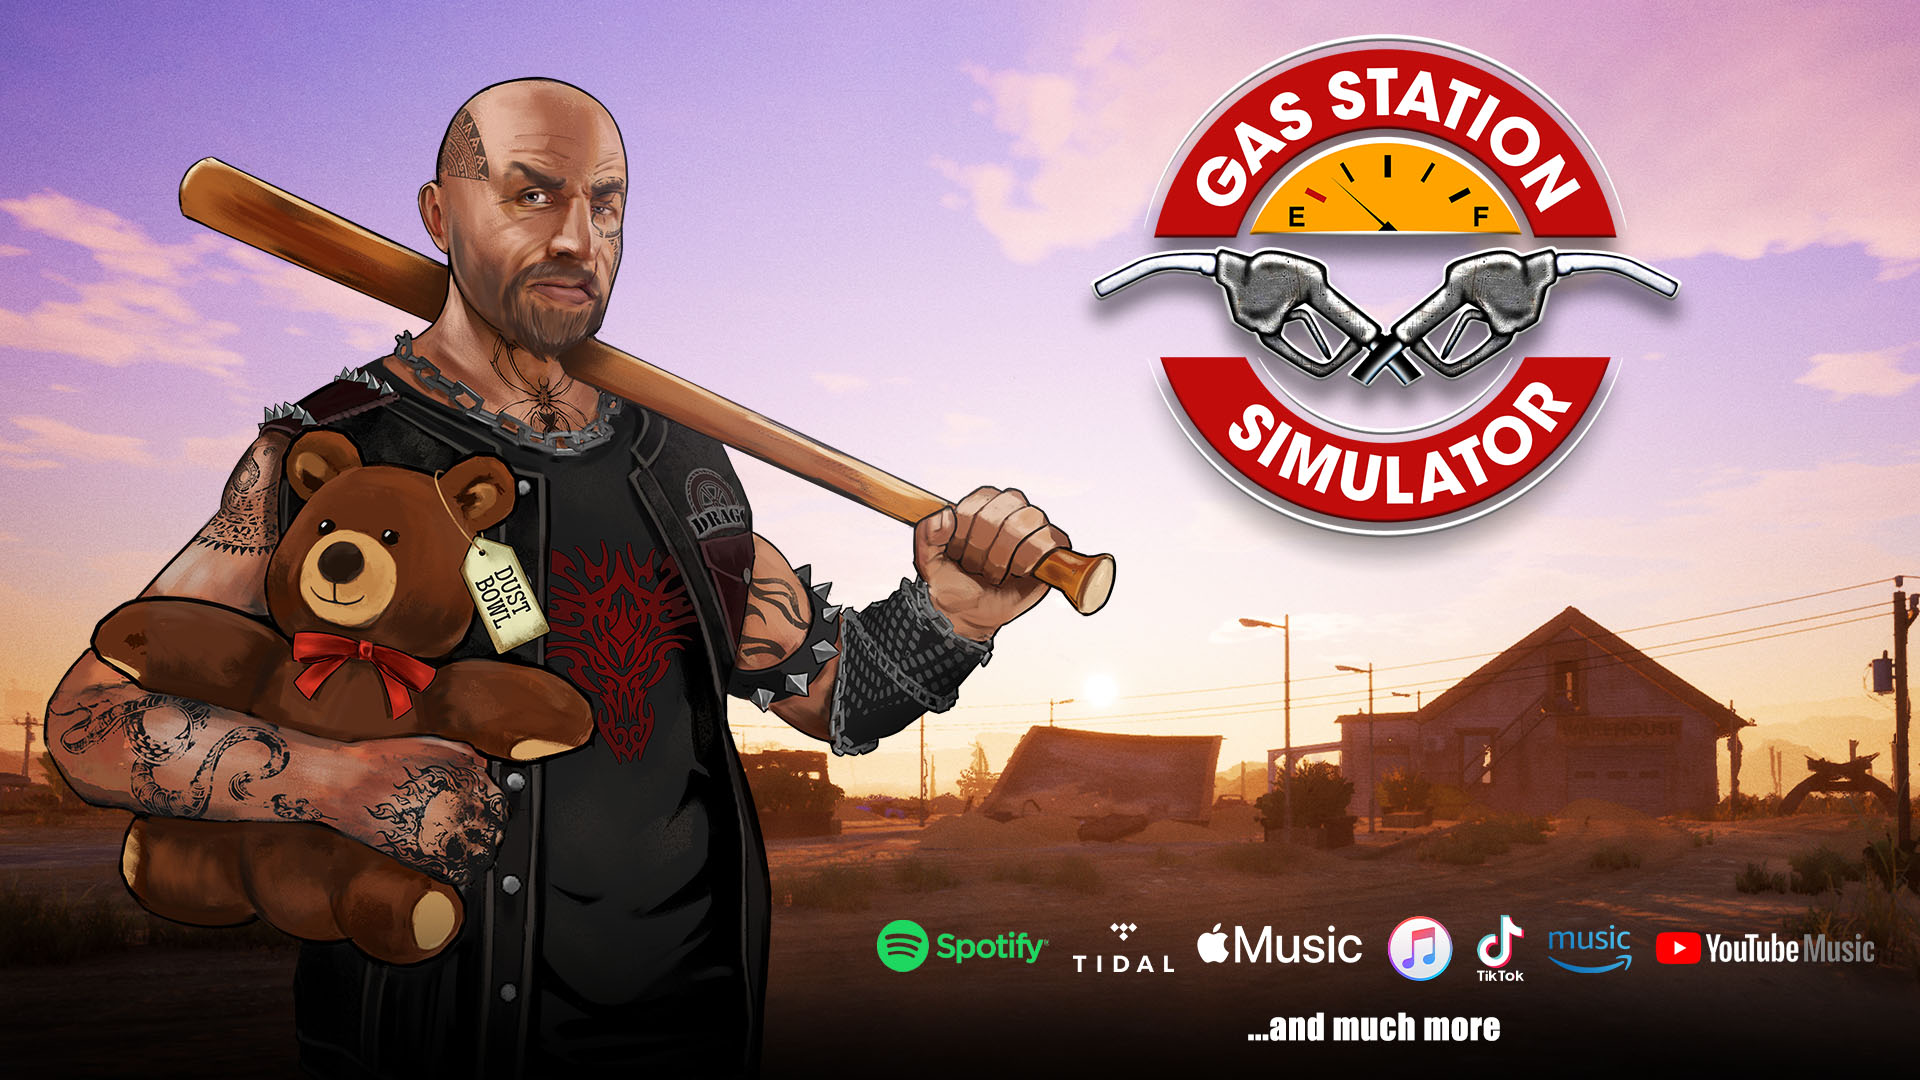 Gas Station Simulator you enjoy the music from Gas Station Simulator and would you like to listen to it while not playing the game?